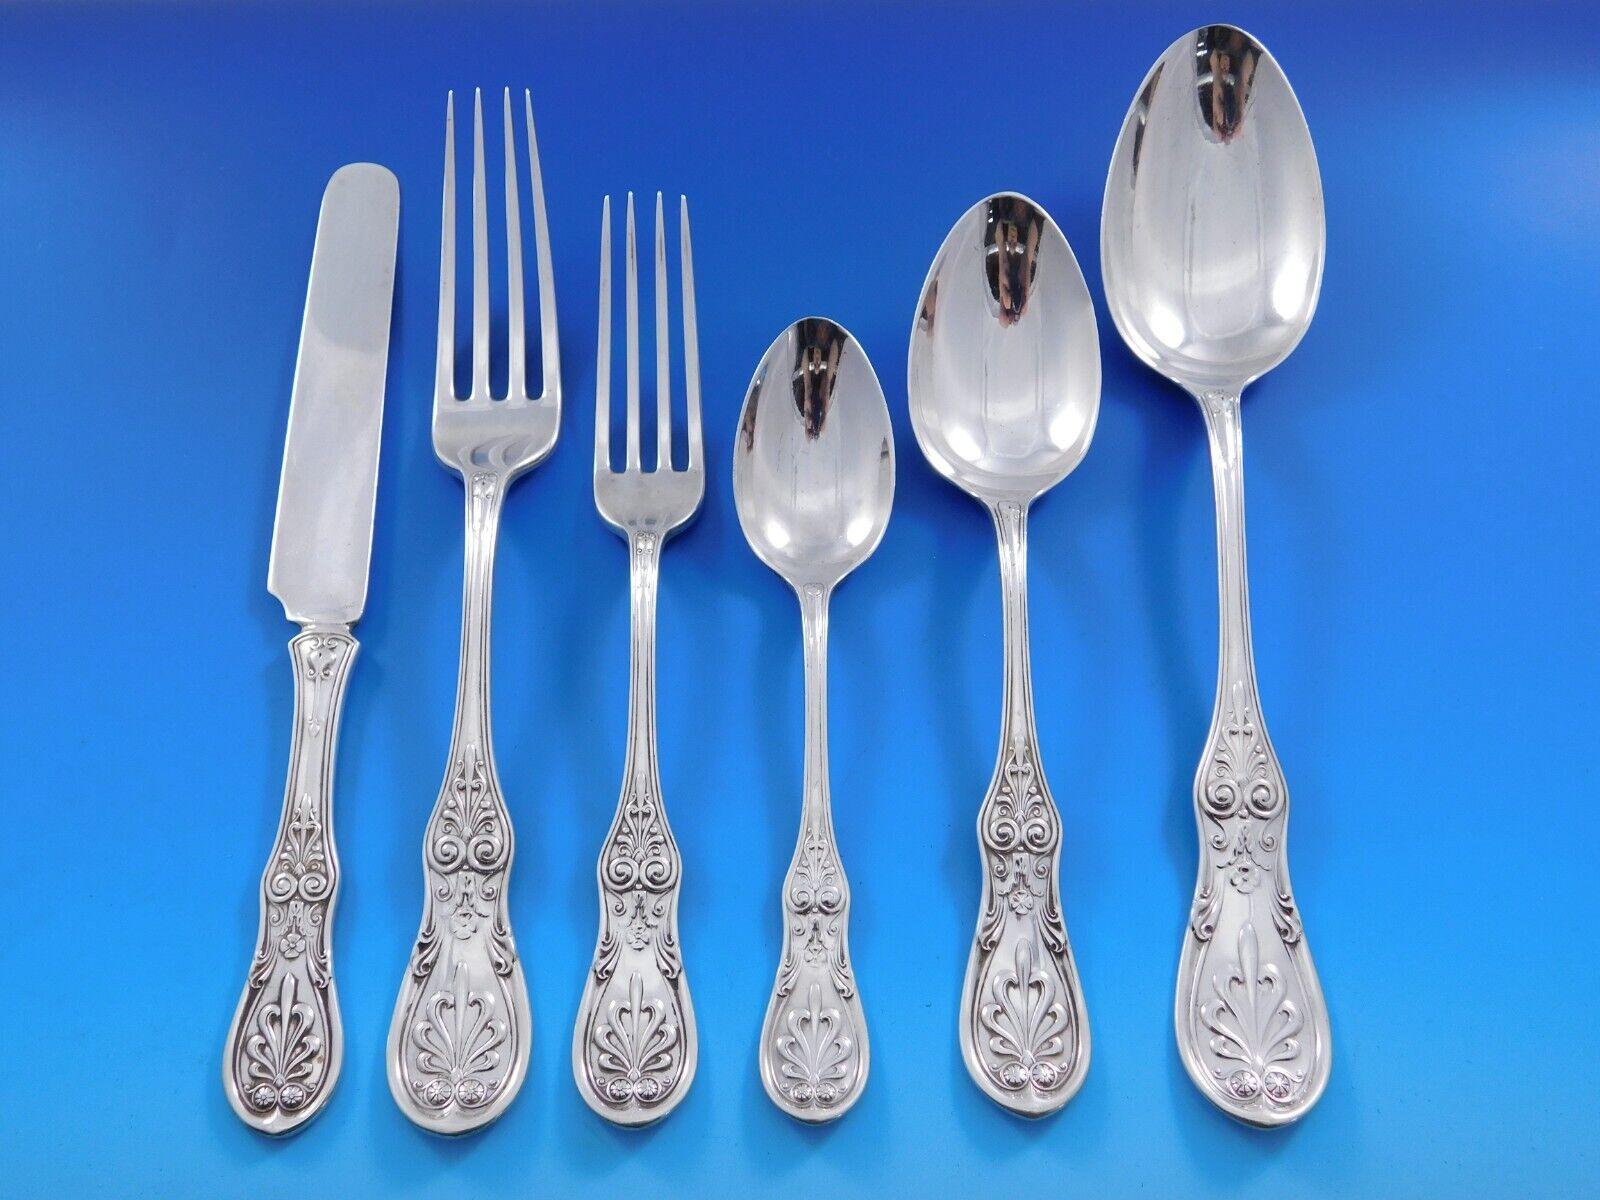 Superb Saratoga by Tiffany and Co. sterling silver Flatware set - 38 Pieces. This set includes:

6 Knives, all-sterling, 8 1/8